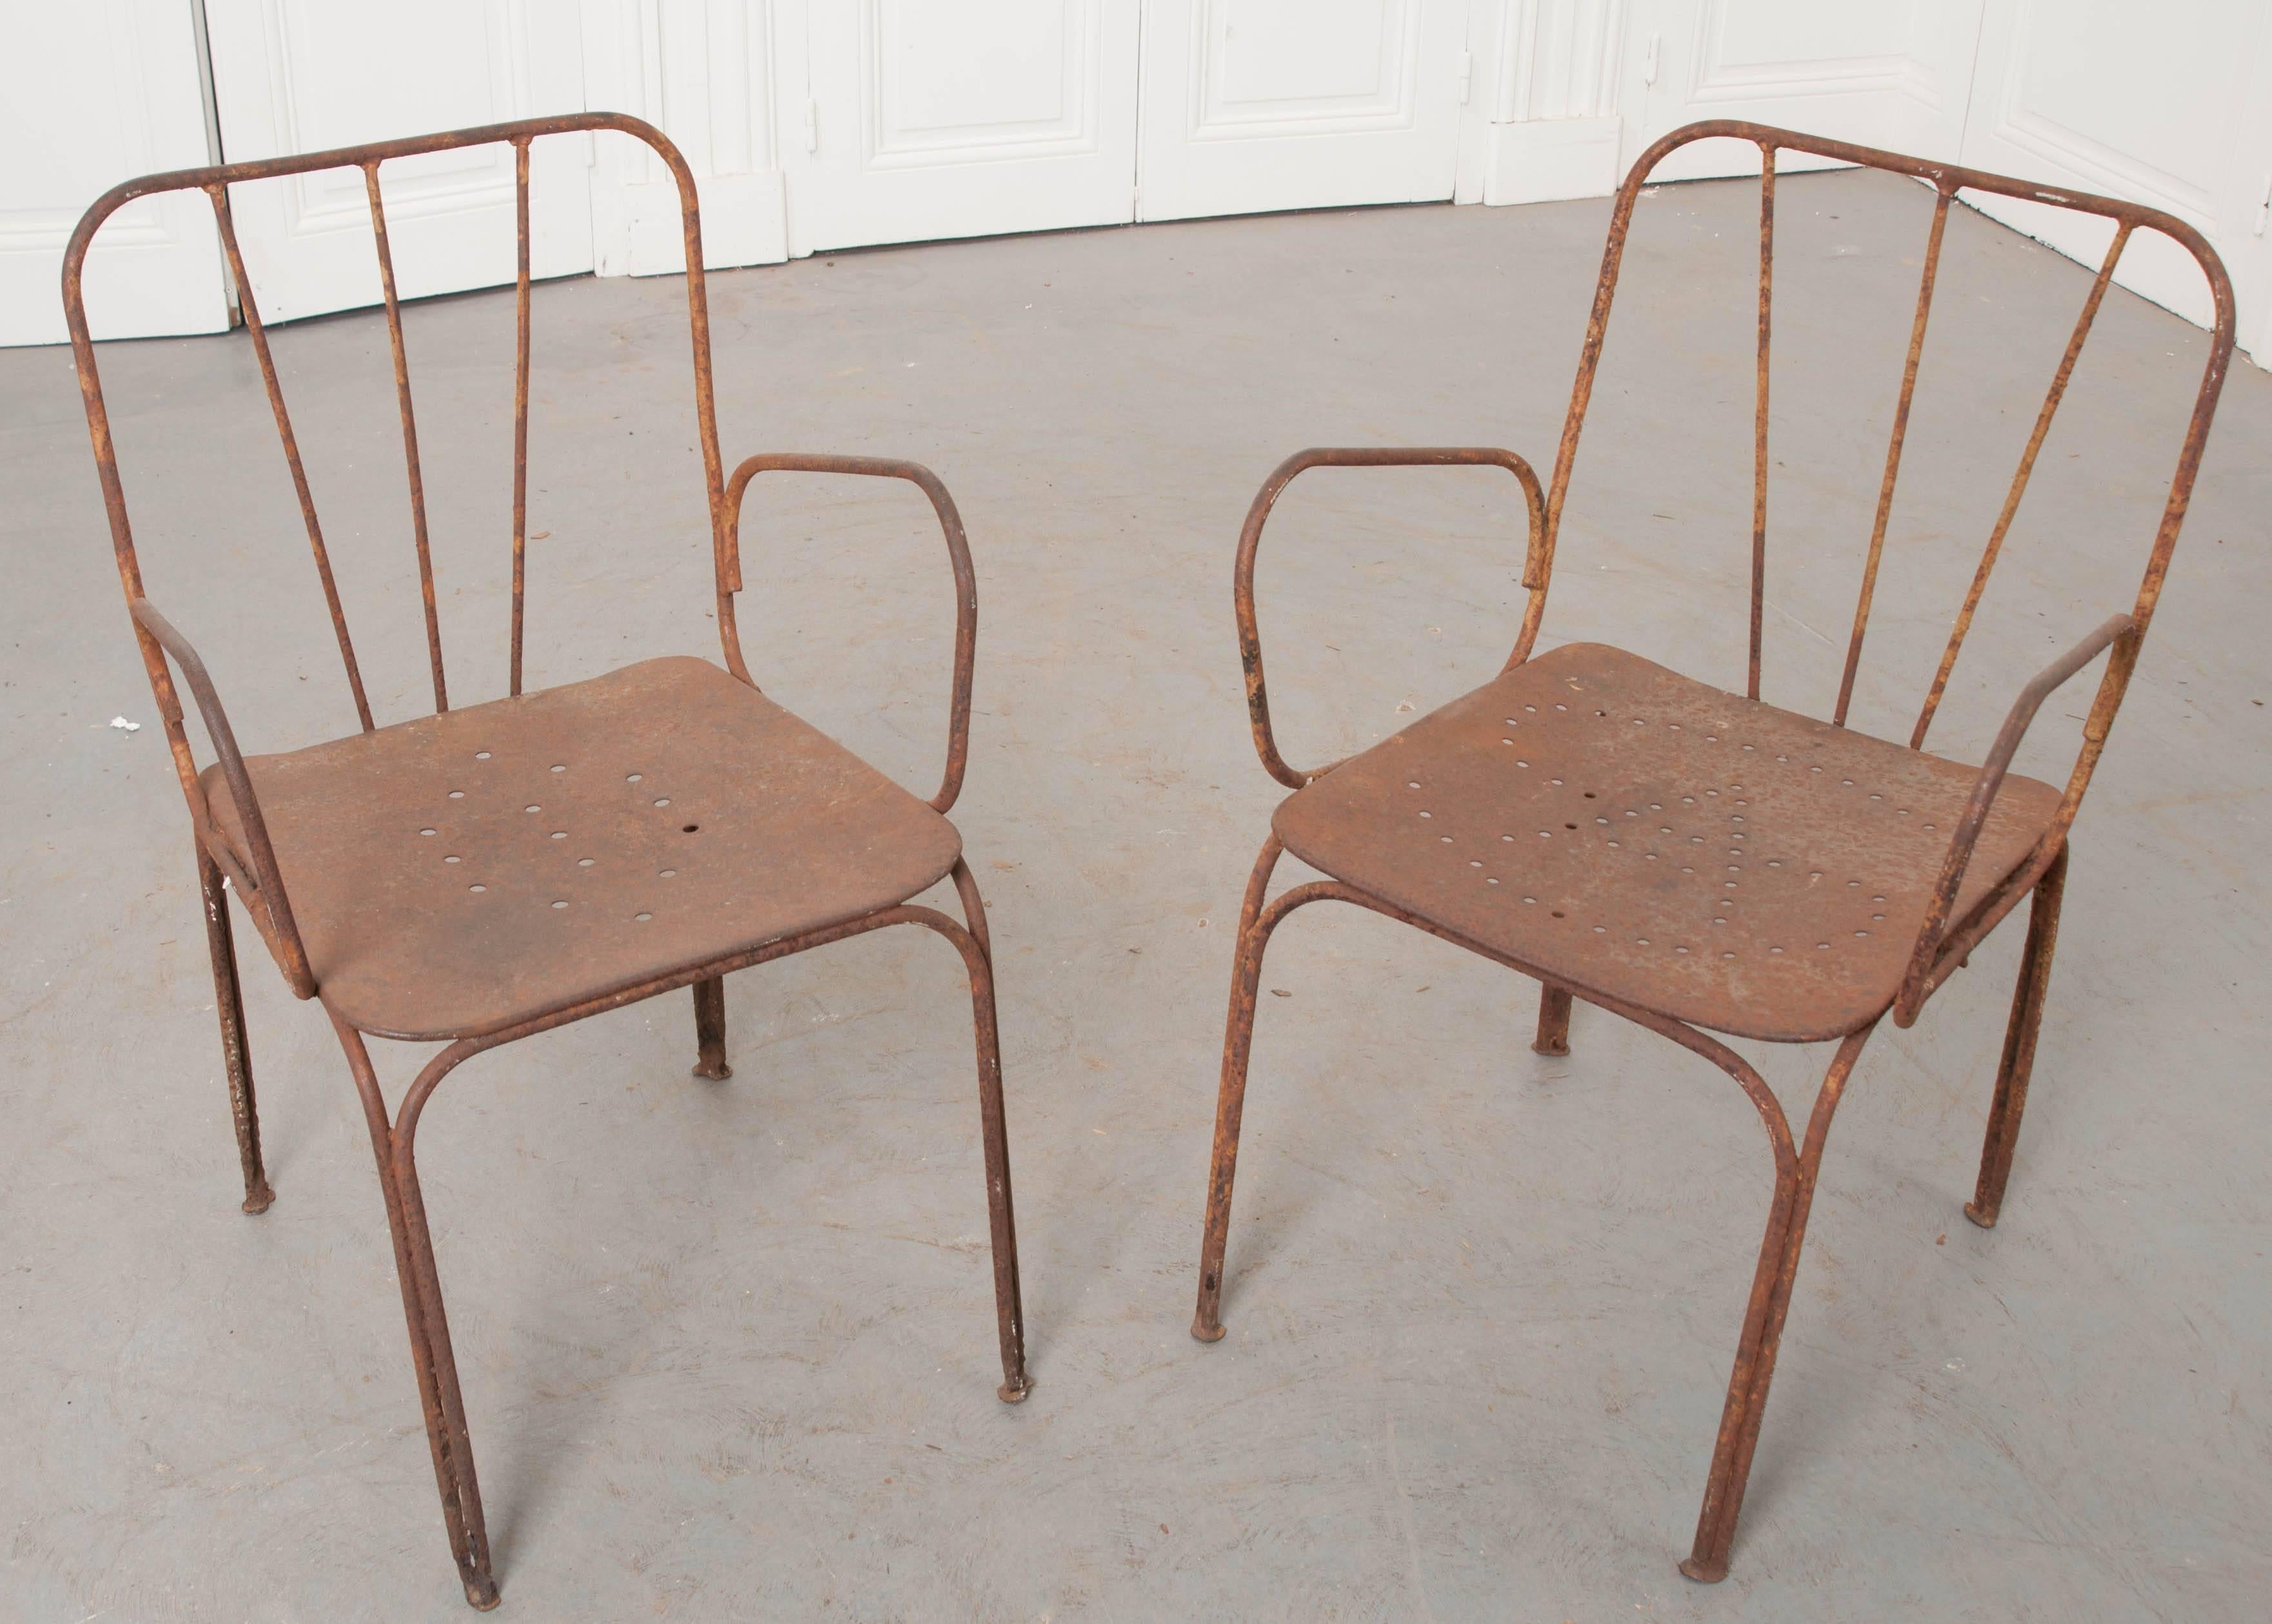 This fantastic pair of metal chairs were made in France near the turn of the century. We absolutely love the patina they have acquired through the years, as well as their clever, yet uncomplicated design! A fabulous pair for the garden or